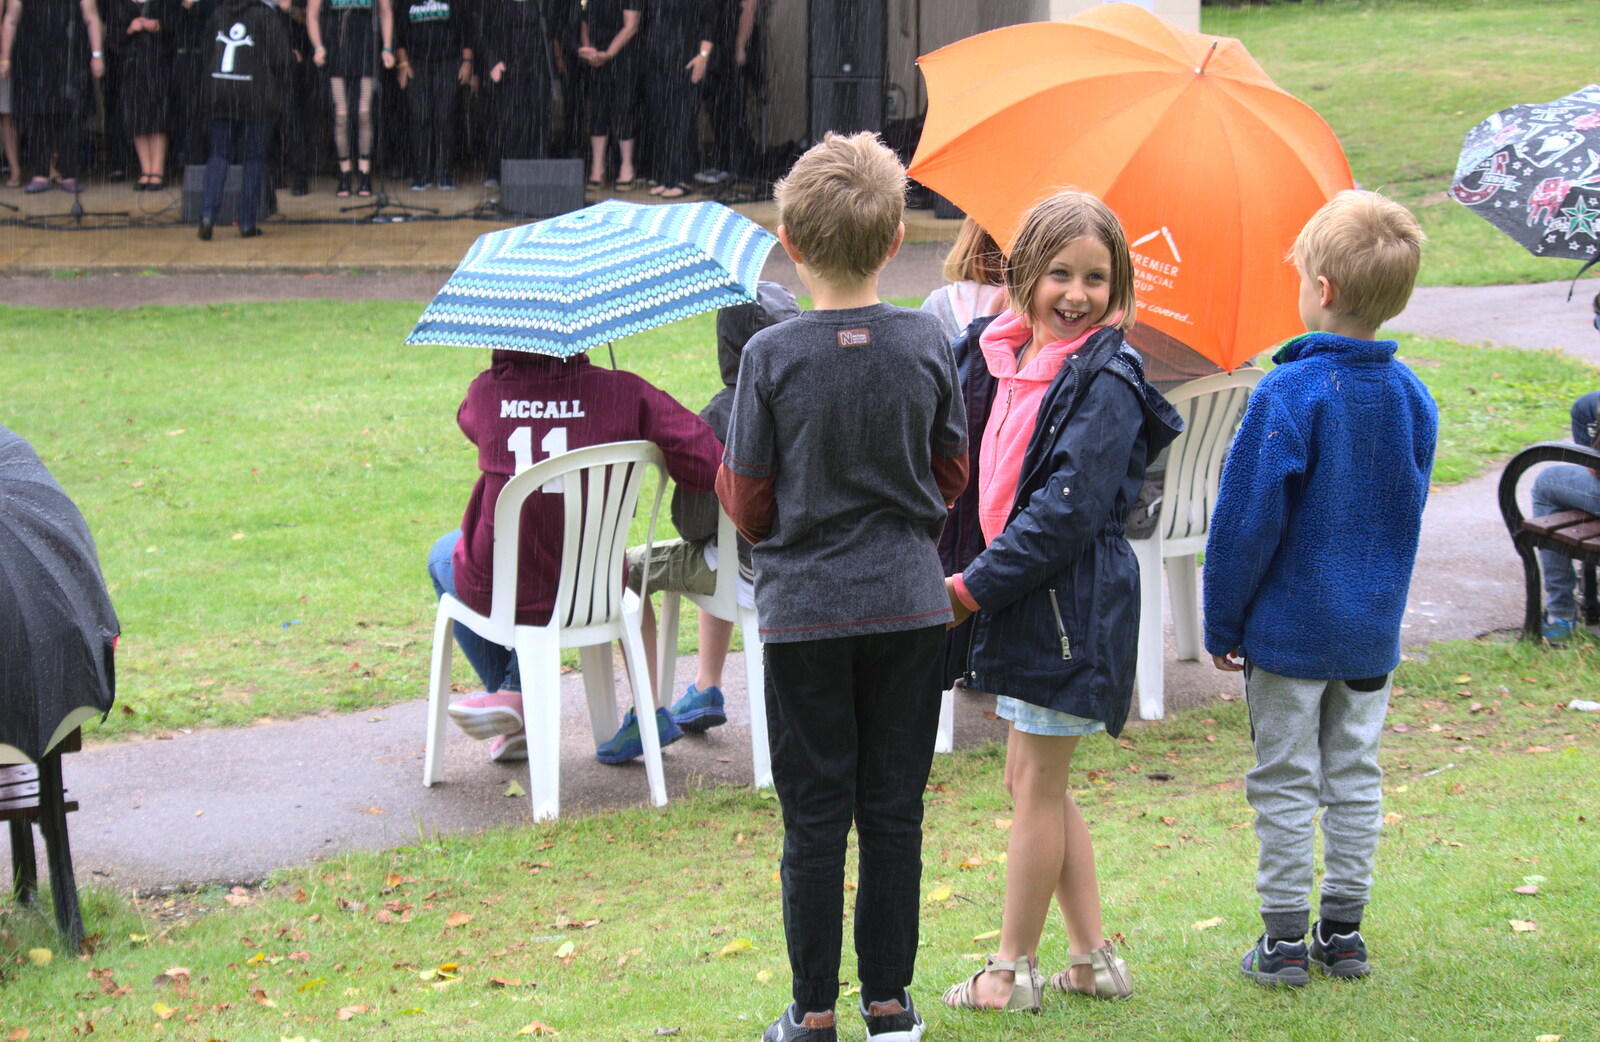 Fred, Sophie and Harry are watching from Diss Fest, or Singin' in the Rain, Diss, Norfolk - 23rd July 2017